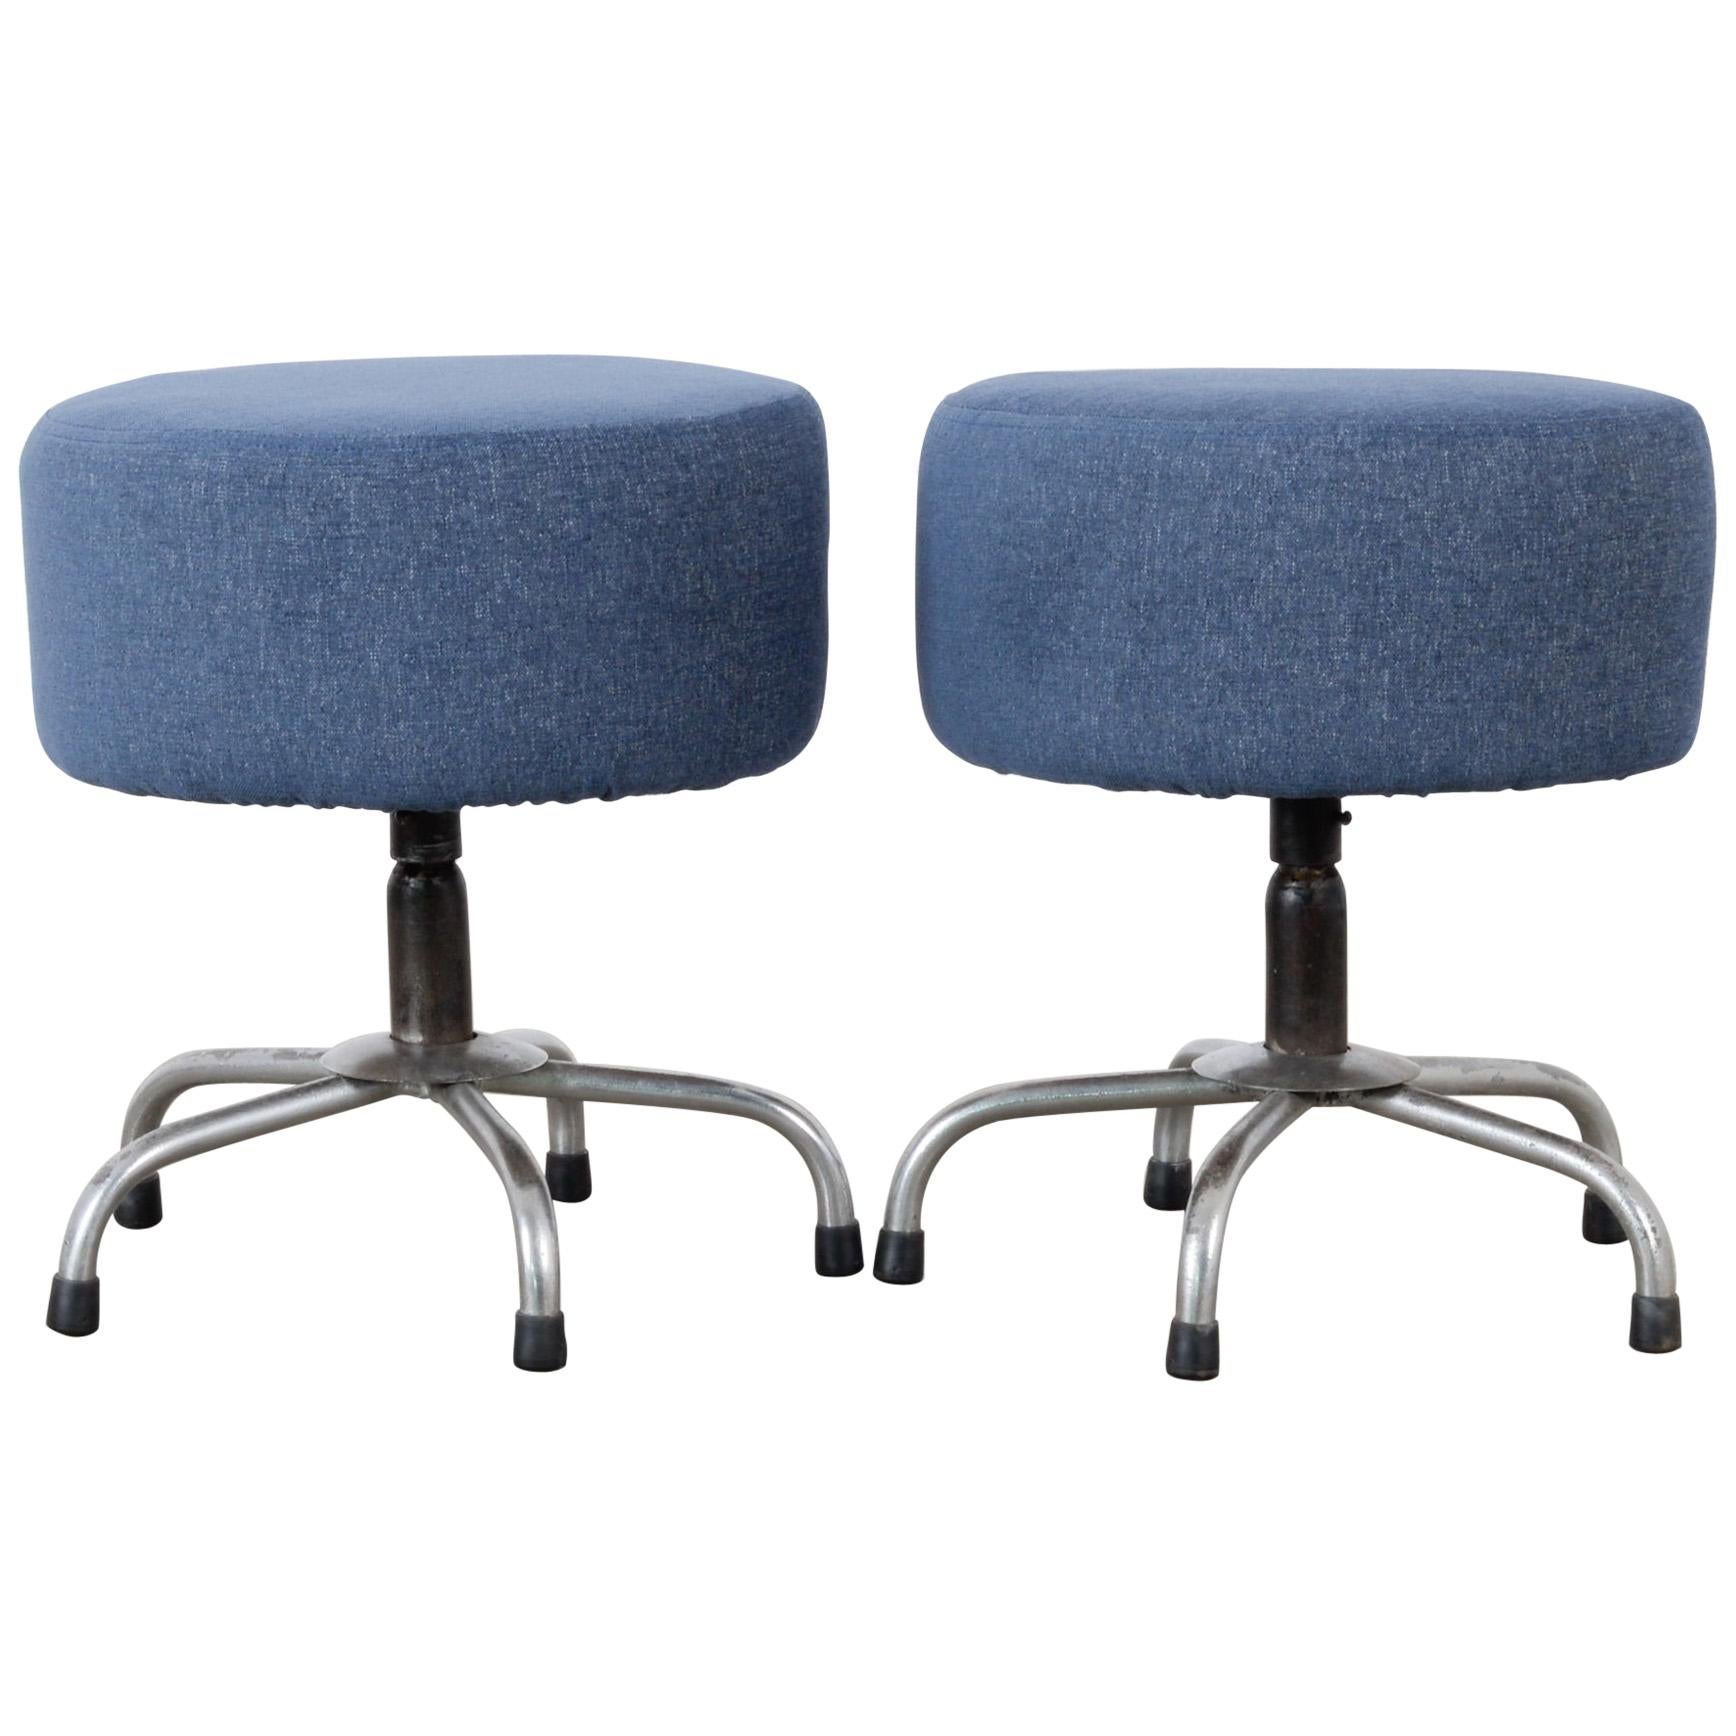 Mid-Century Modern Vintage French Stools, a Pair